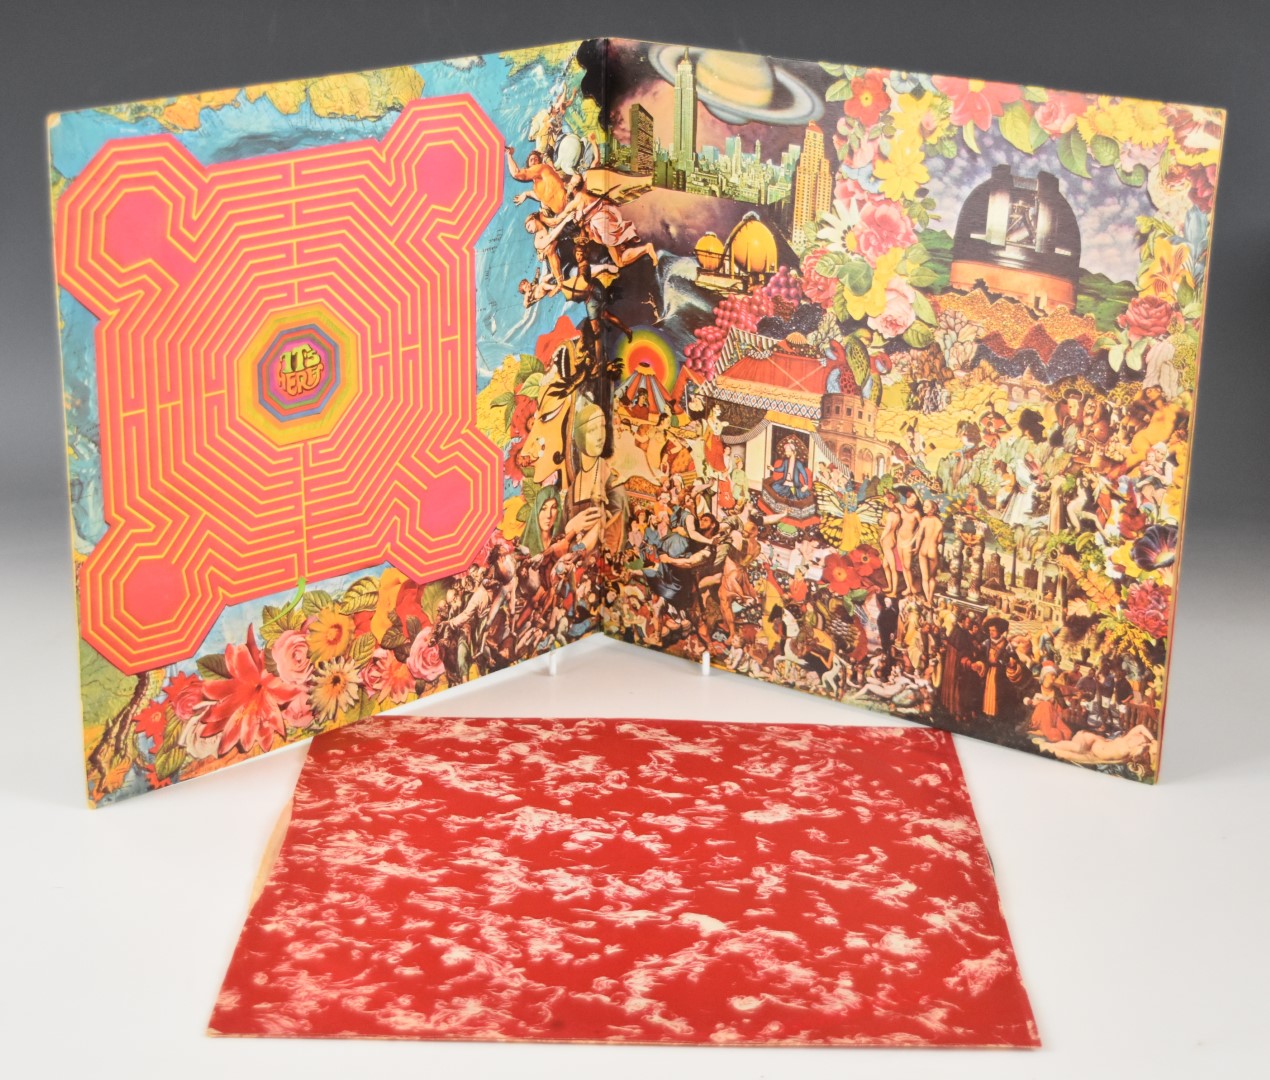 Rolling Stones - Their Satanic Majesties Request (TXL 103), Decca blue label, record appears VG - Image 3 of 4